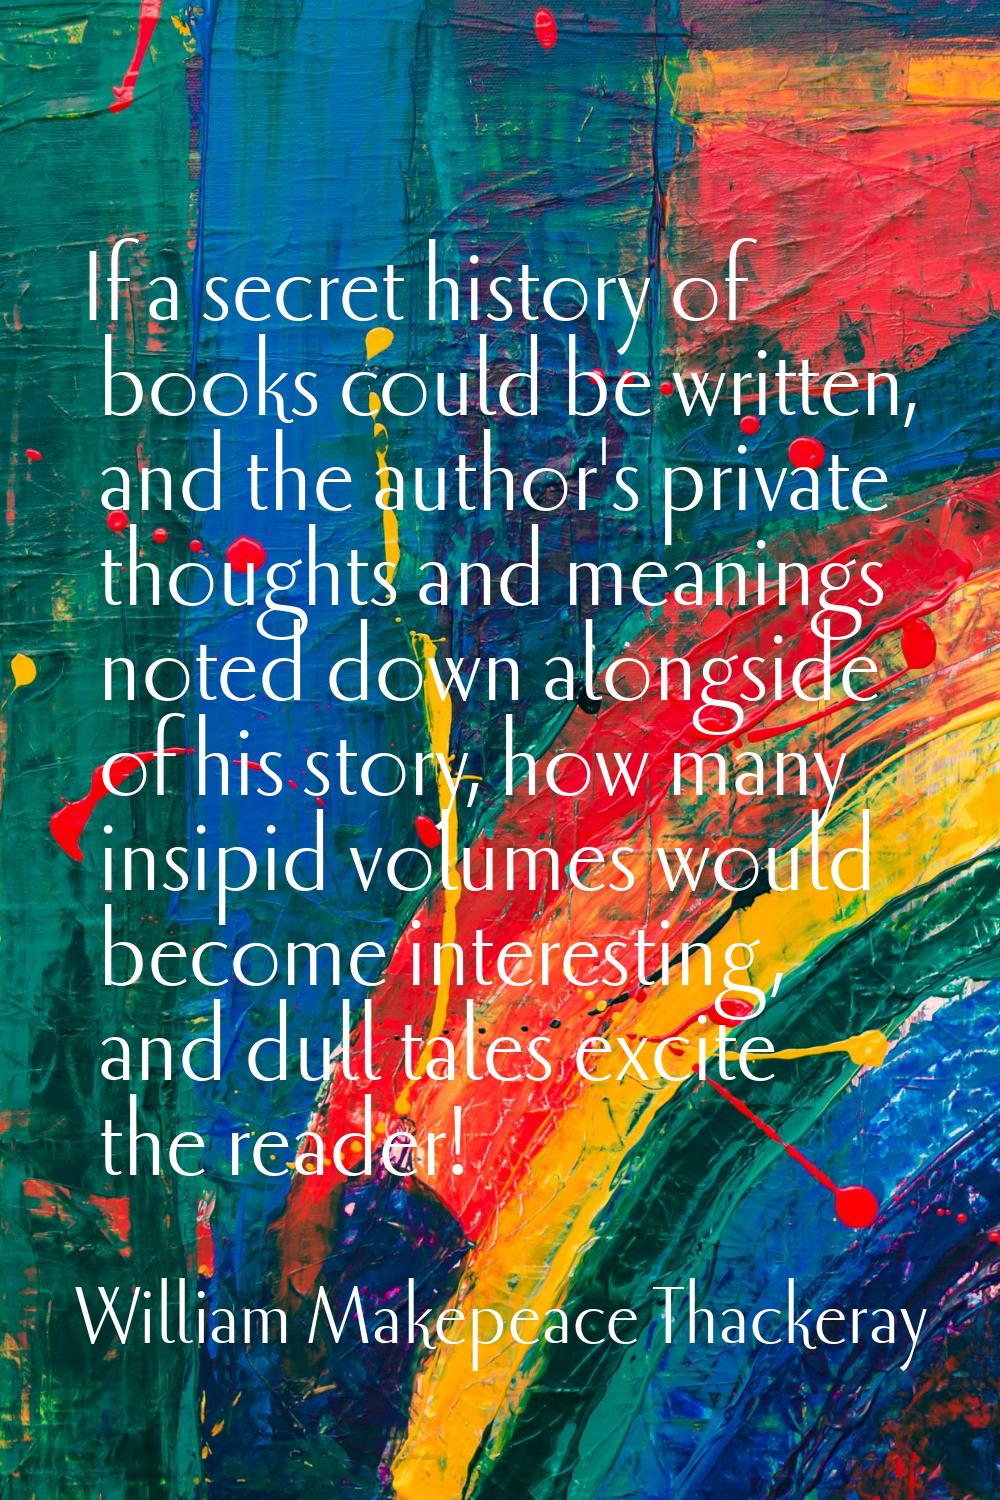 If a secret history of books could be written, and the author's private thoughts and meanings noted